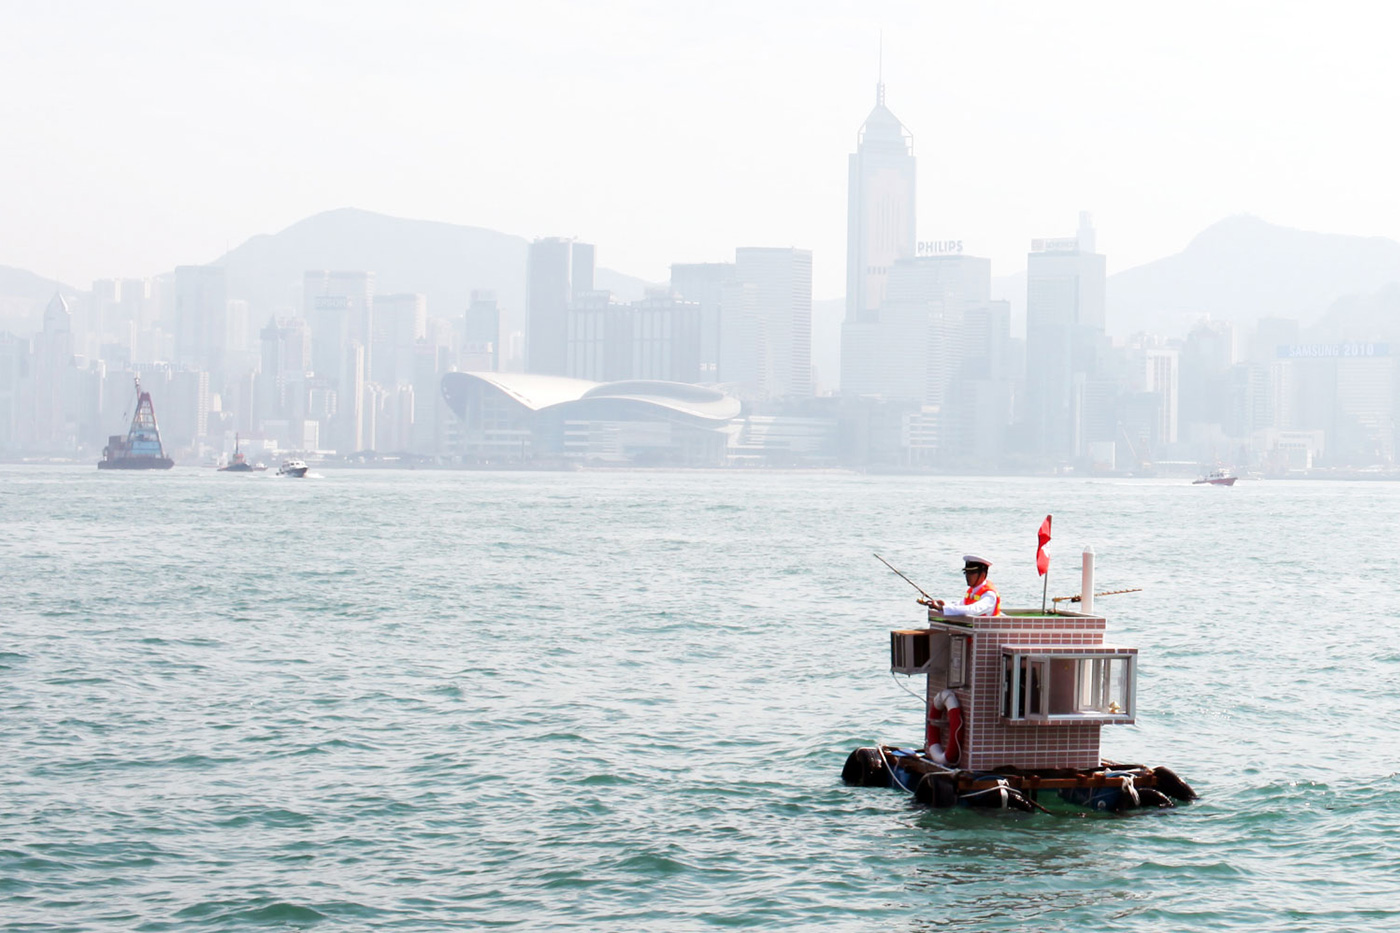 A photograph of a person floating on a raft in front of the Hong Kong skyline